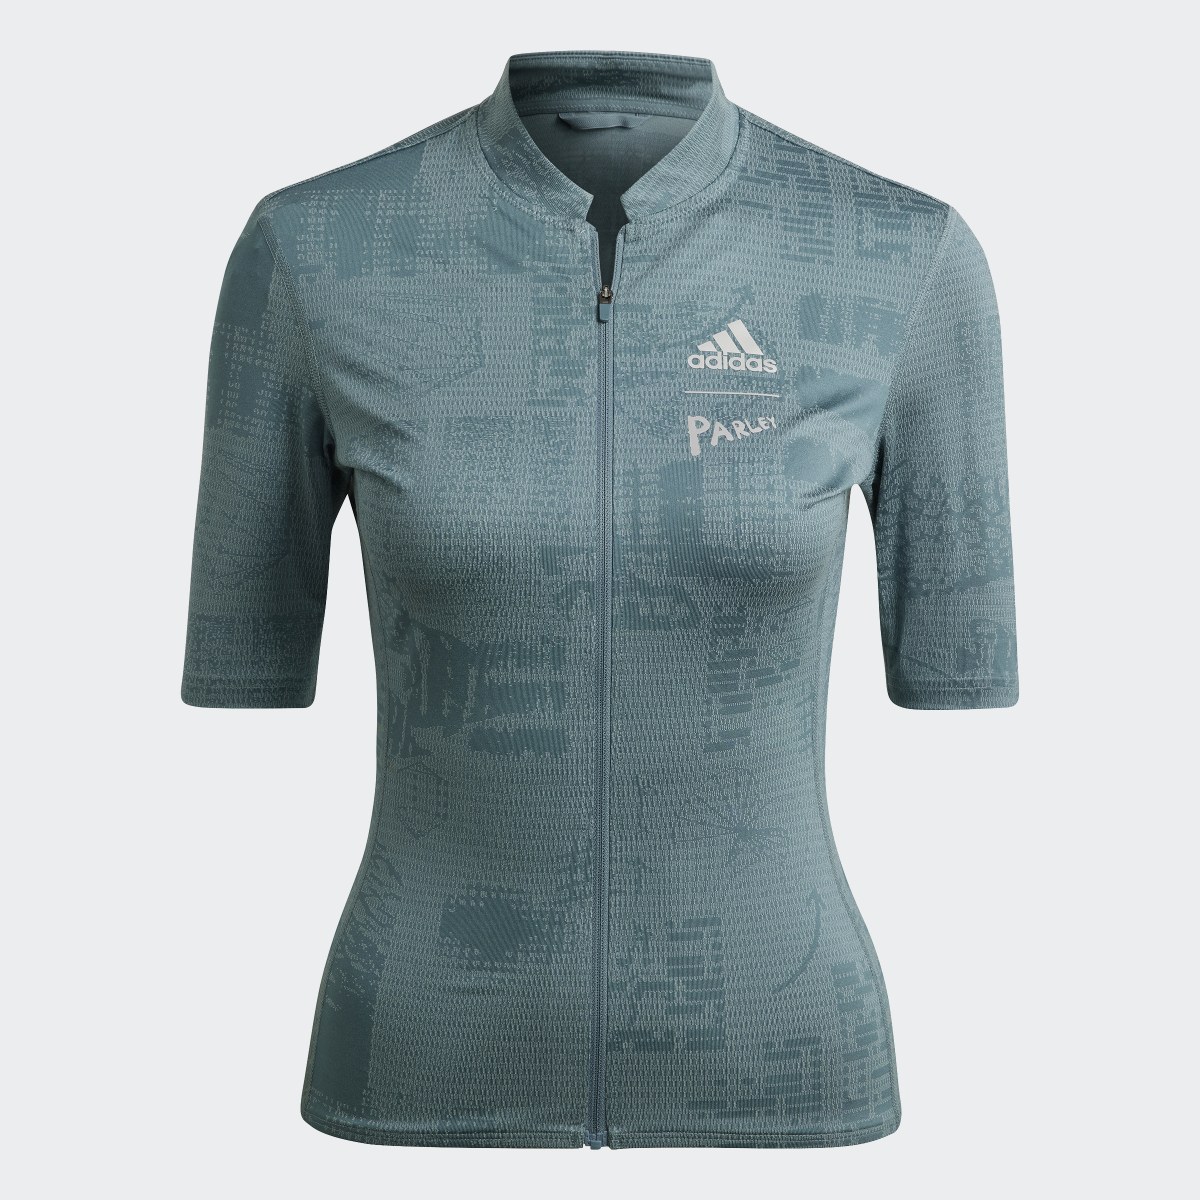 Adidas The Parley Short Sleeve Cycling Jersey. 6